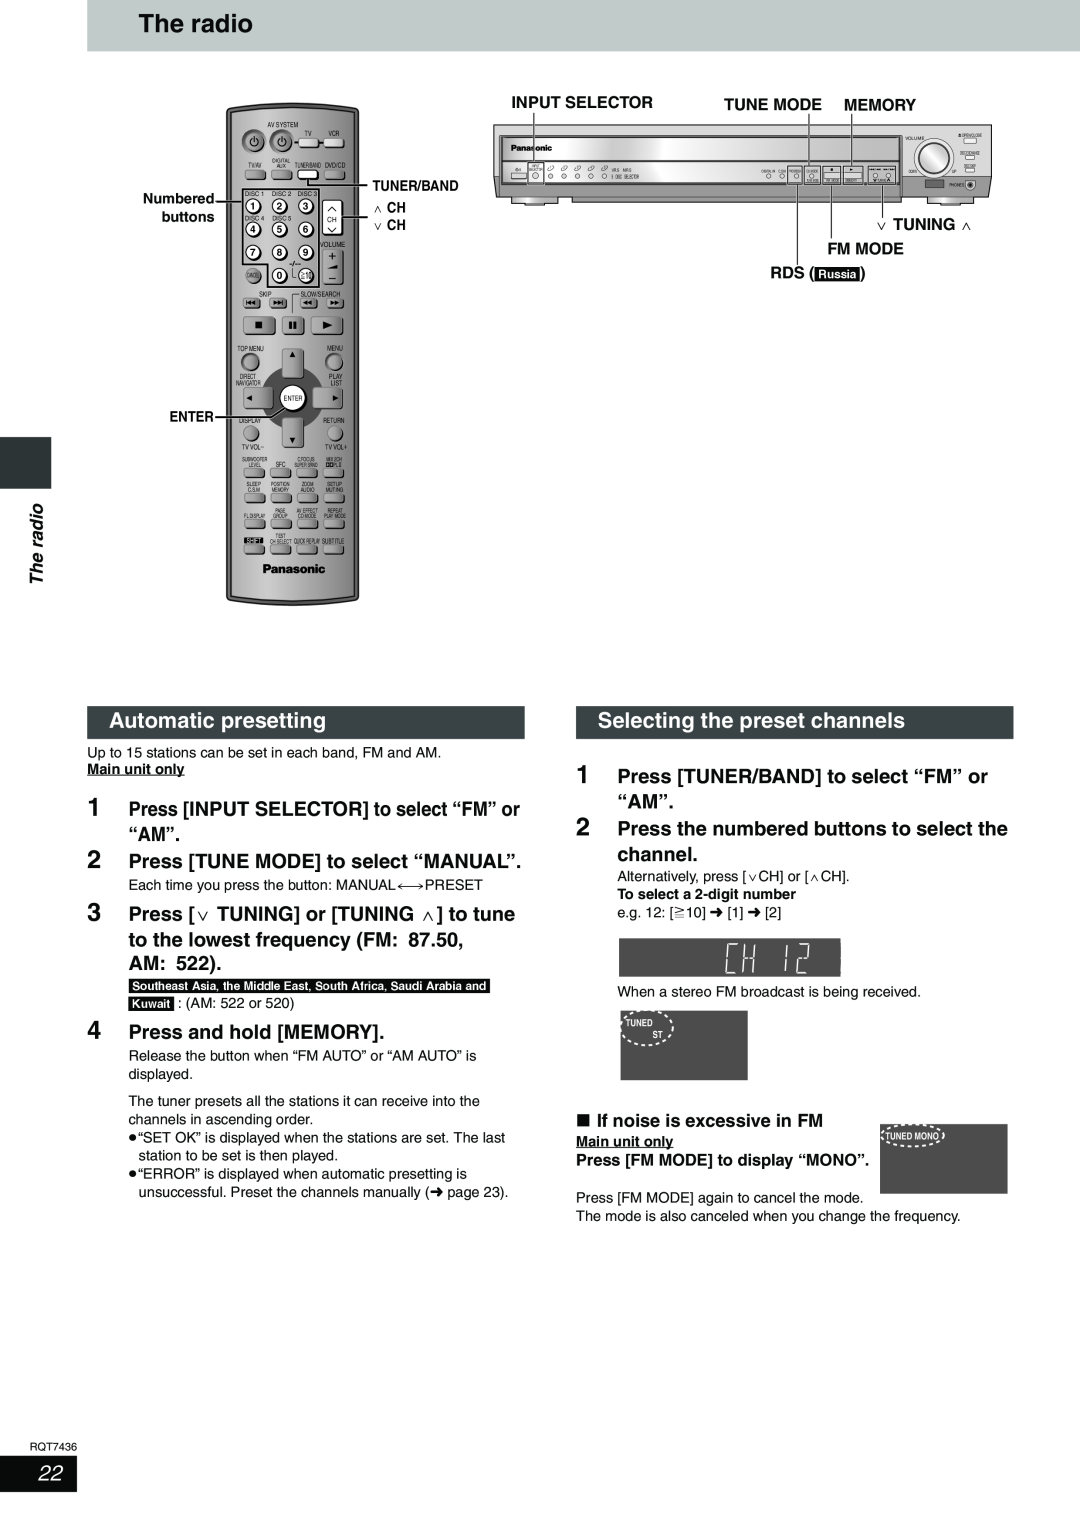 Panasonic SC-HT928 The radio, Automatic presetting, Selecting the preset channels, 2Press TUNE MODE to select “MANUAL” 